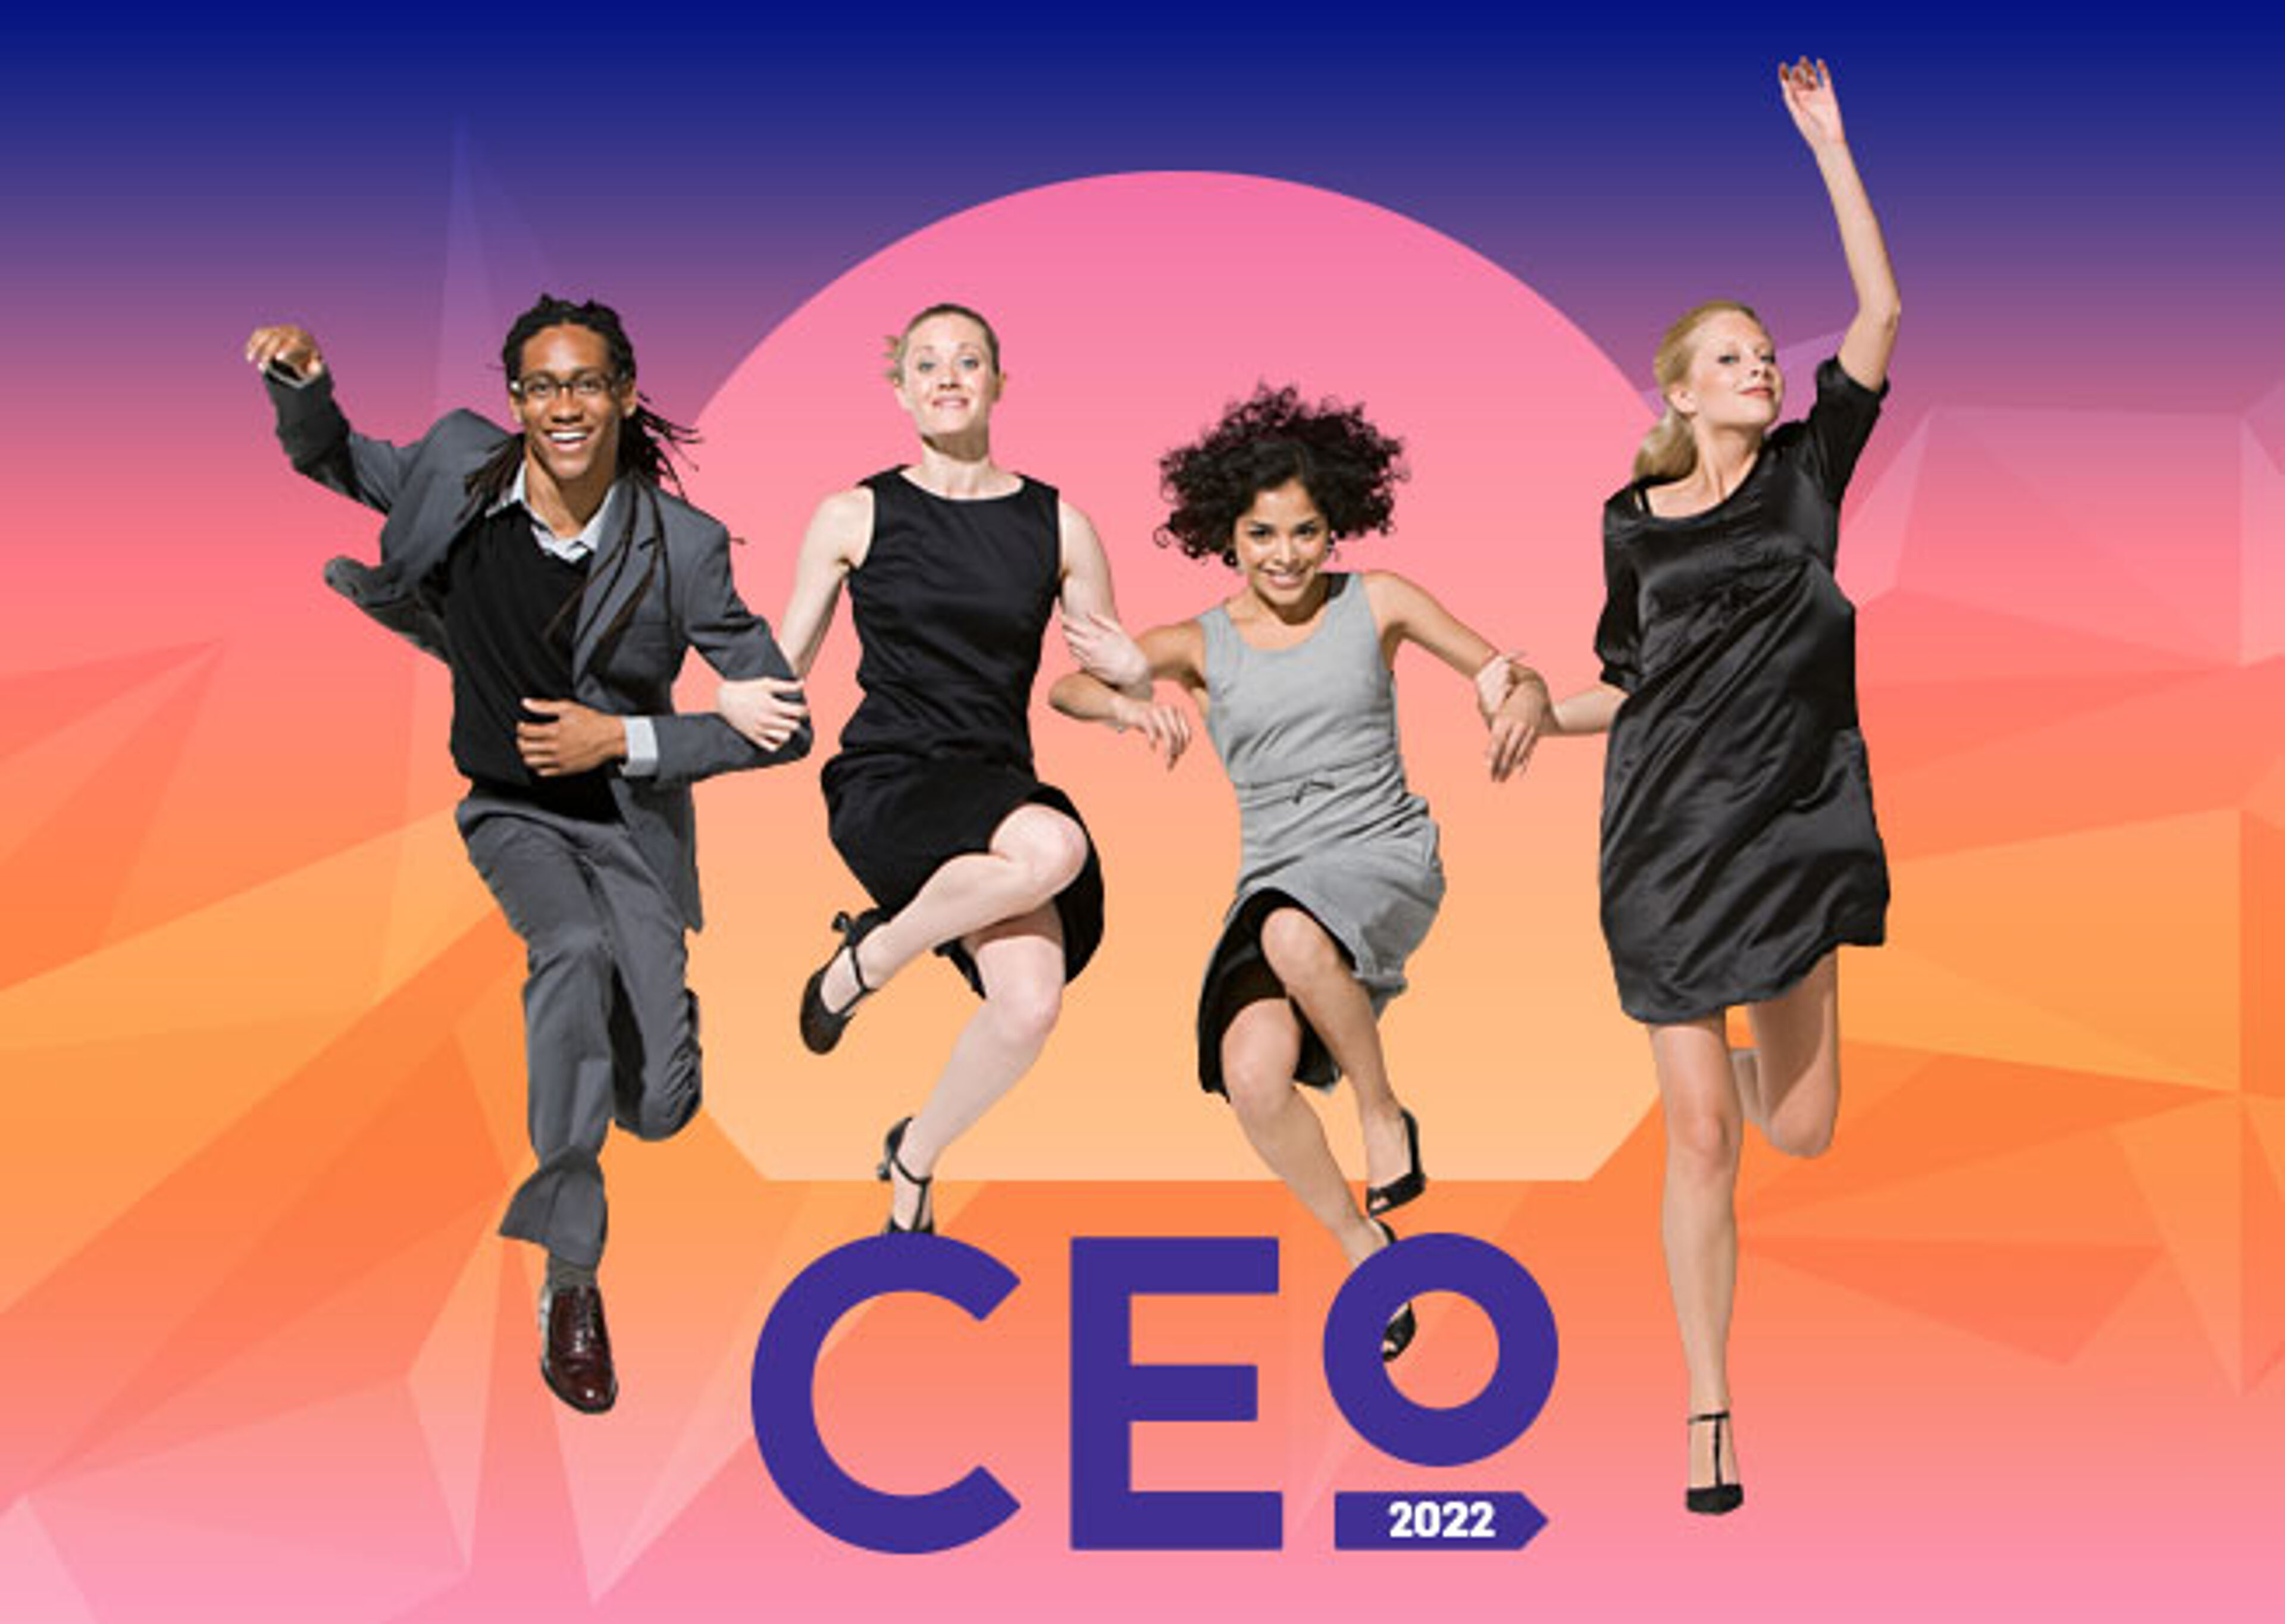 Four professionals joyfully leaping against a vibrant background with the acronym 'CEO' and the year '2022'.

